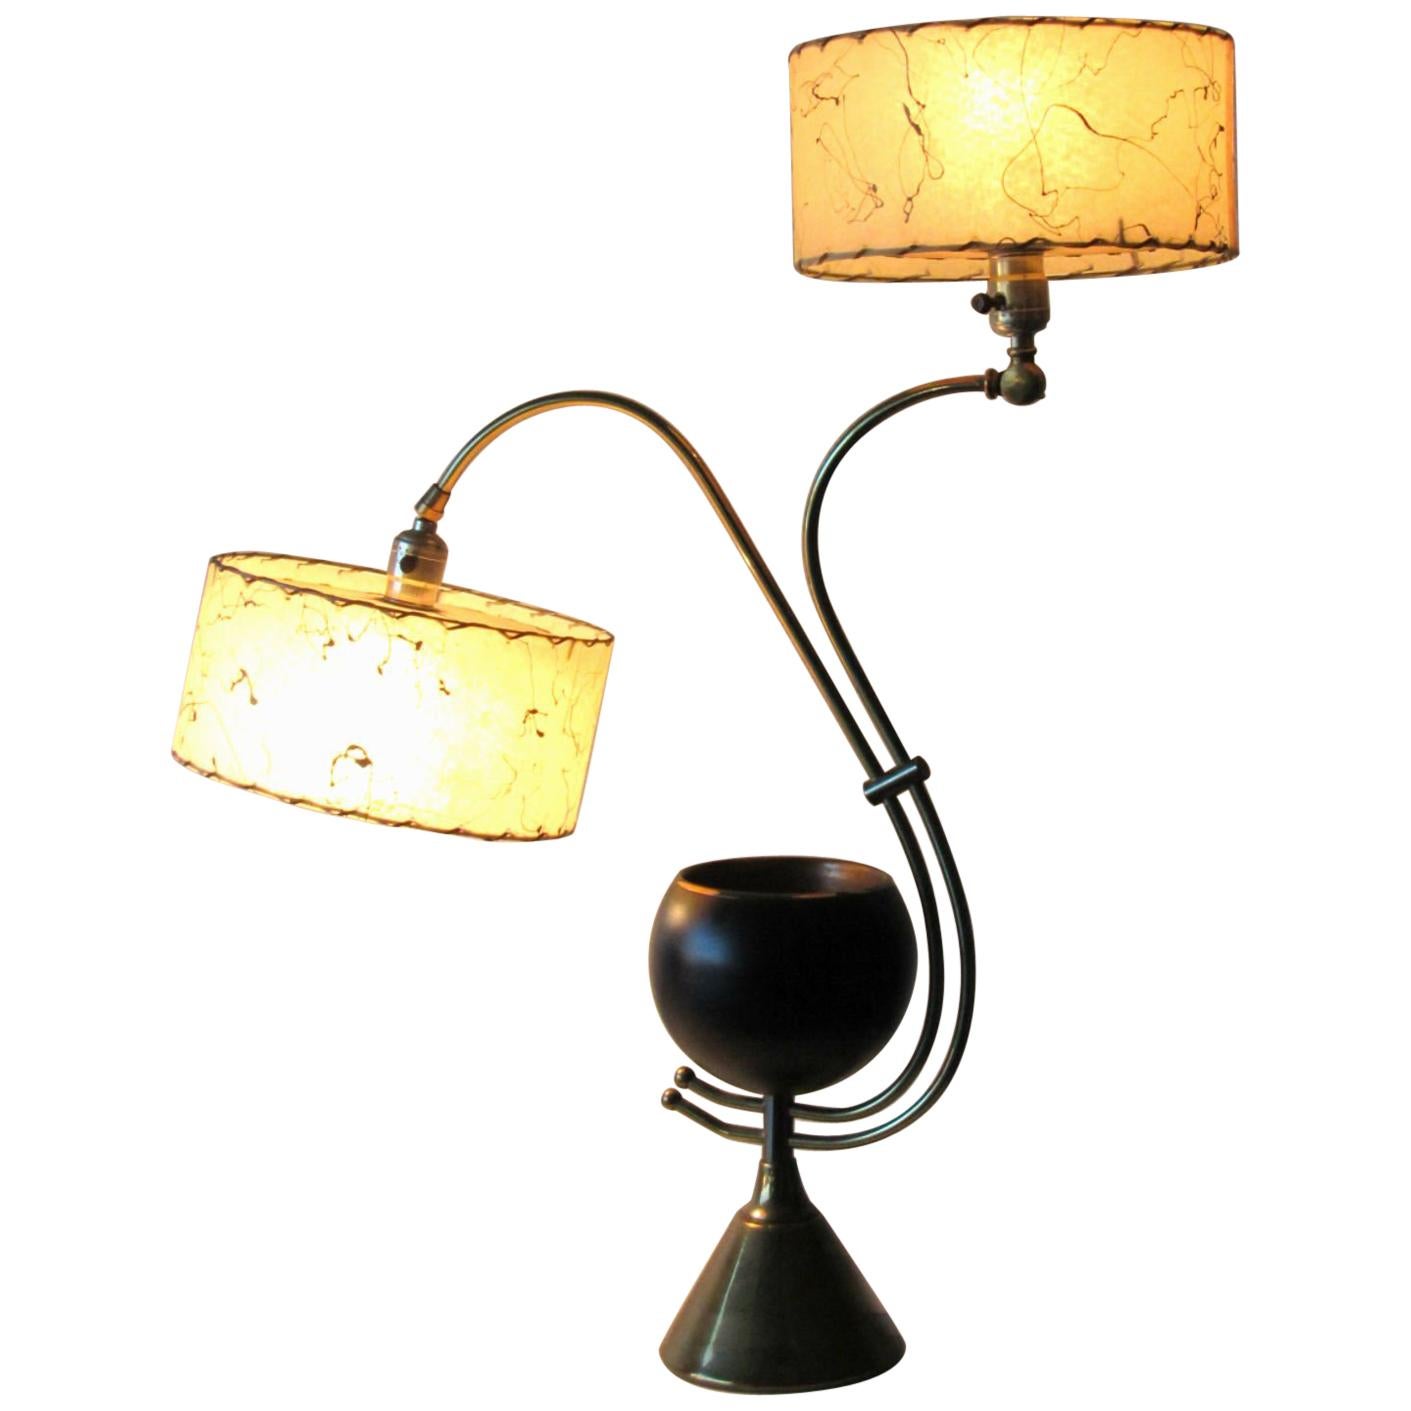 Atomic Age Adjustable Mid-Century Modern Majestic Lamp 1950s For Sale